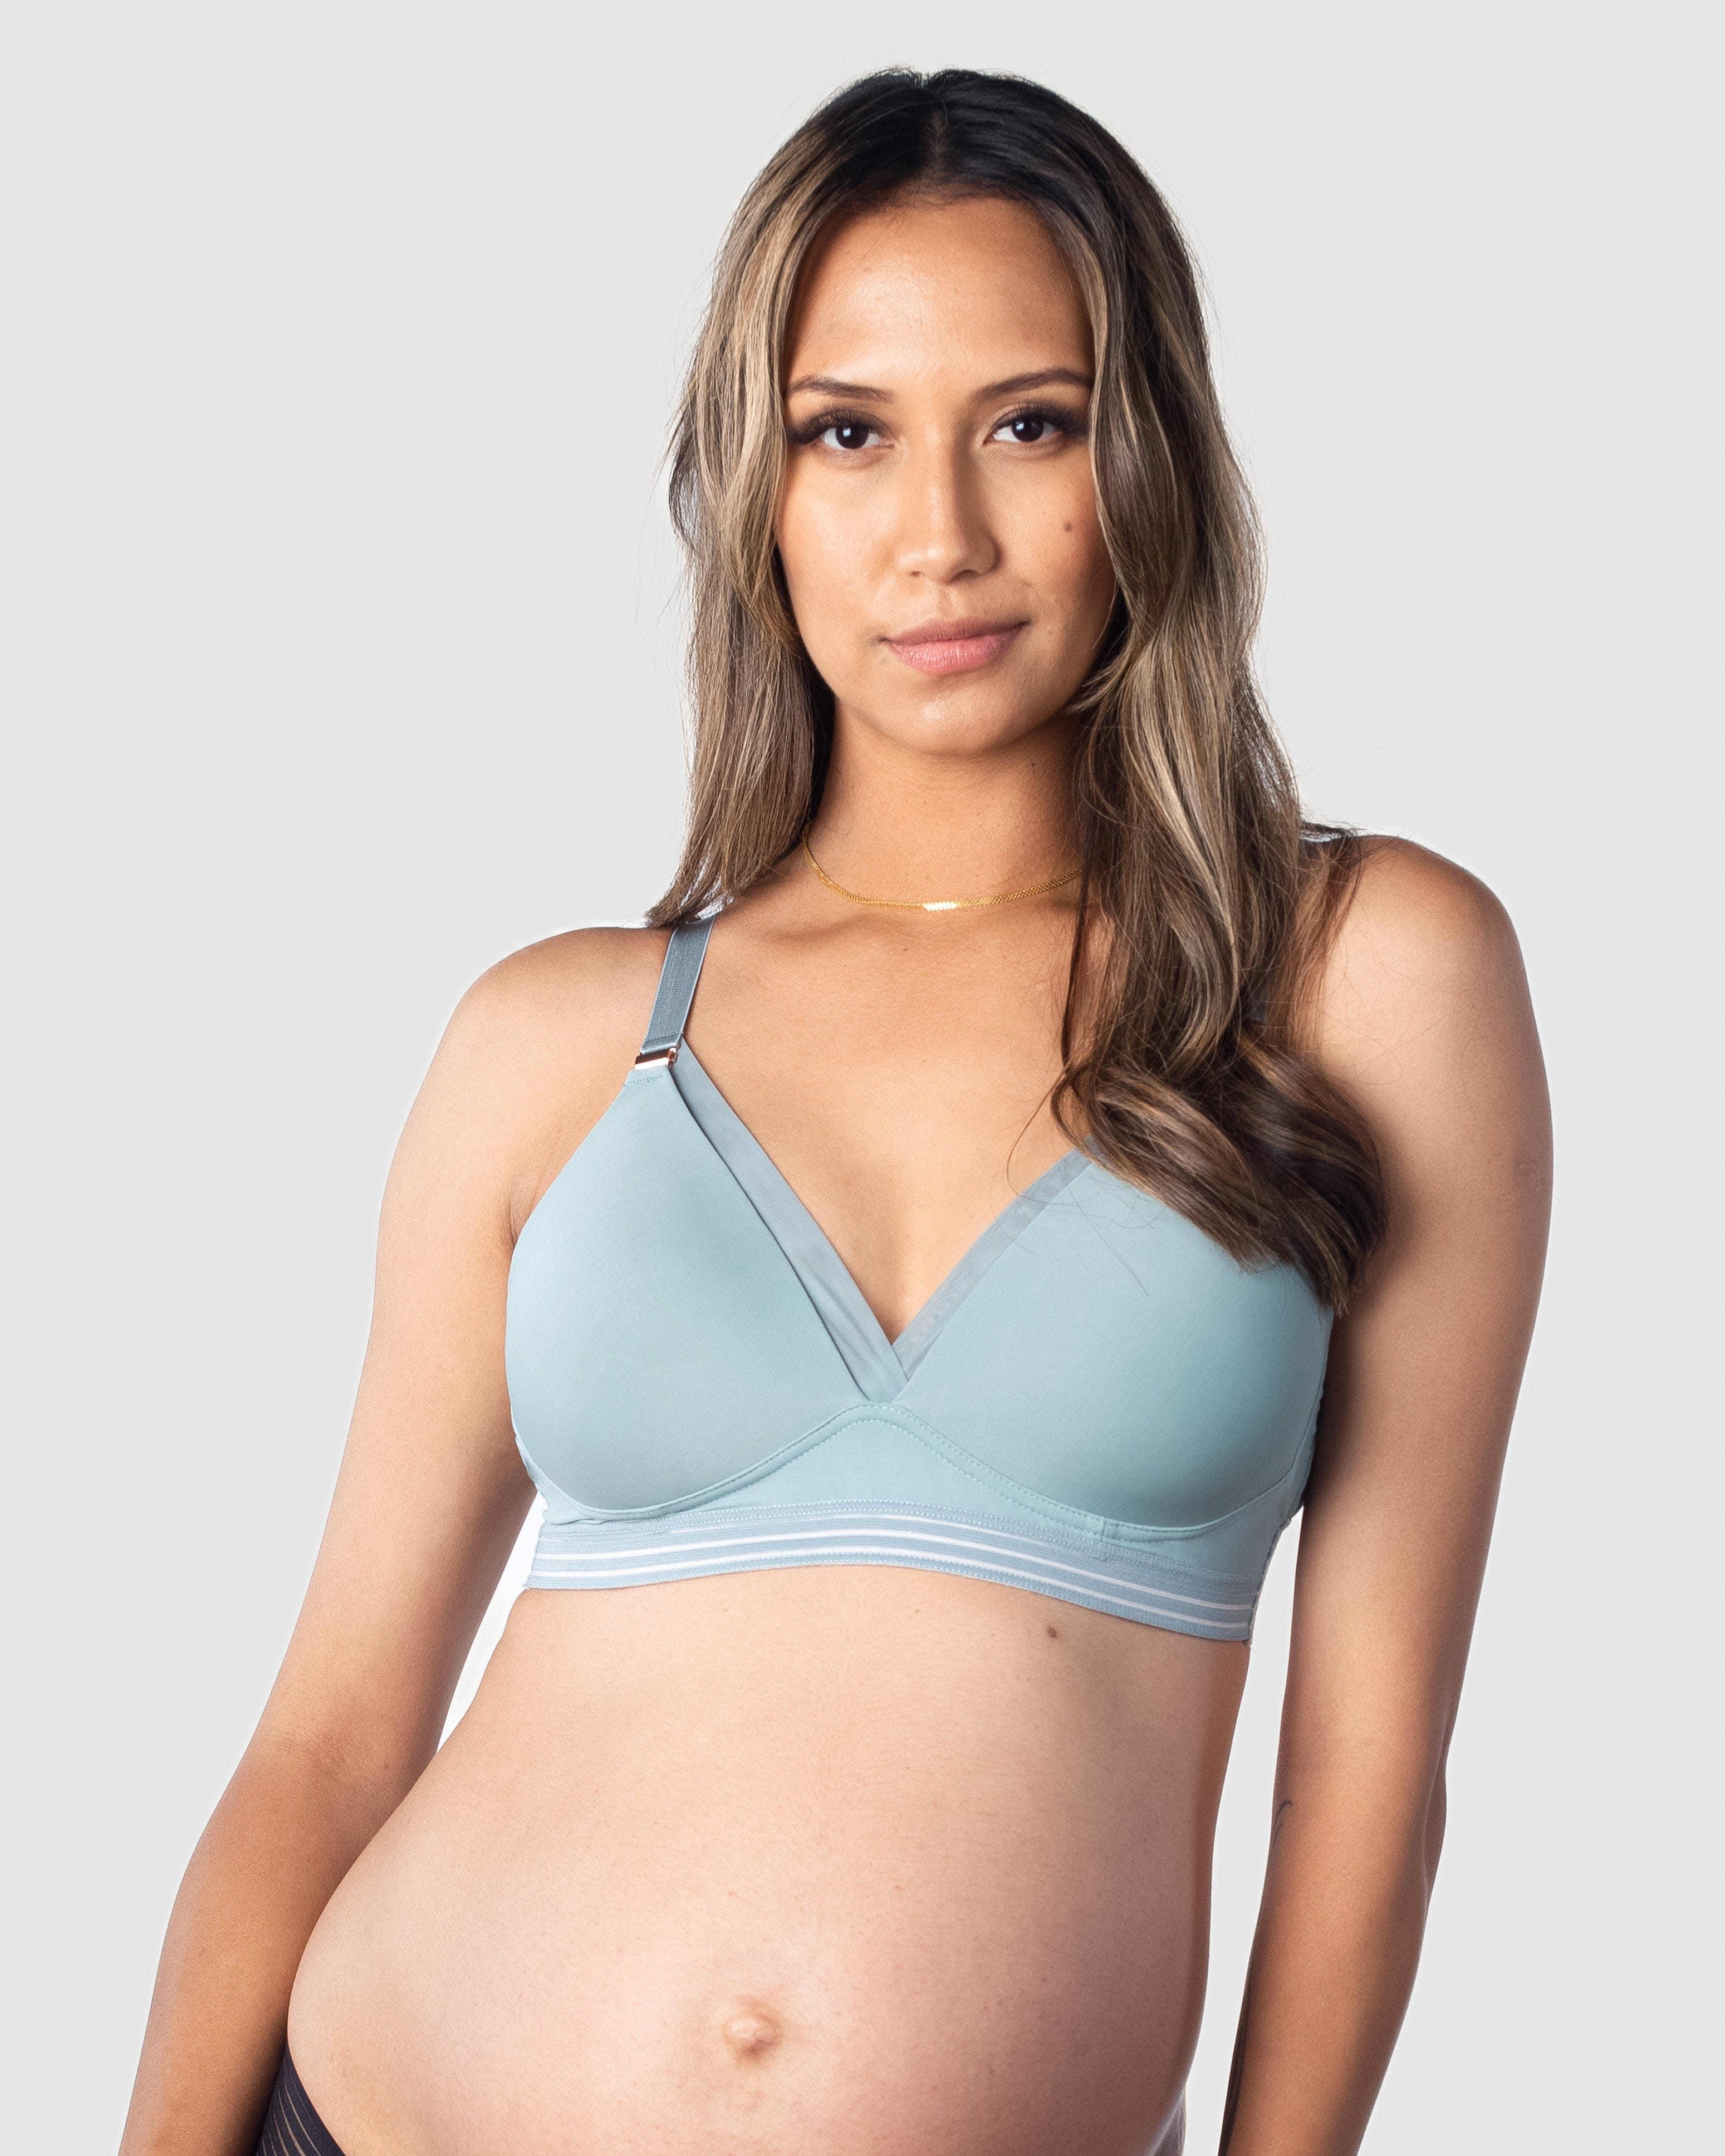 Maternity Nursing T-Shirt Bra M&S 2 Pack Non Wired Cotton Soft 32D